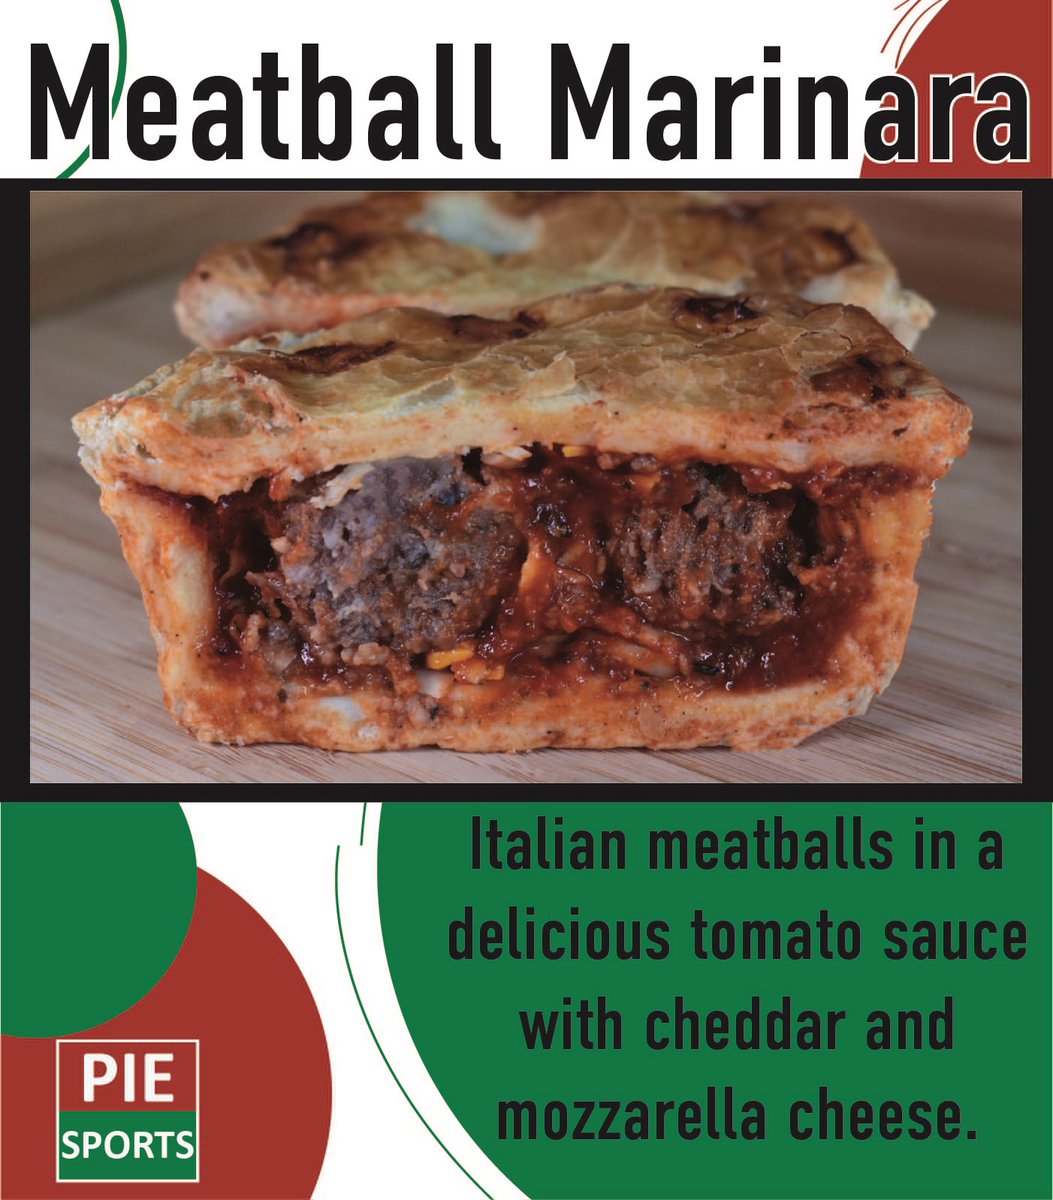 Our Deep Fill Meatball Marinara Pie continues as POTM this weekend when @PartickThistle play @AyrUnitedFC and @saintmirrenfc take on @RangersFC Watching at home and want in on the Marinara action, order today before 11.00am for Saturday delivery at piesports.com